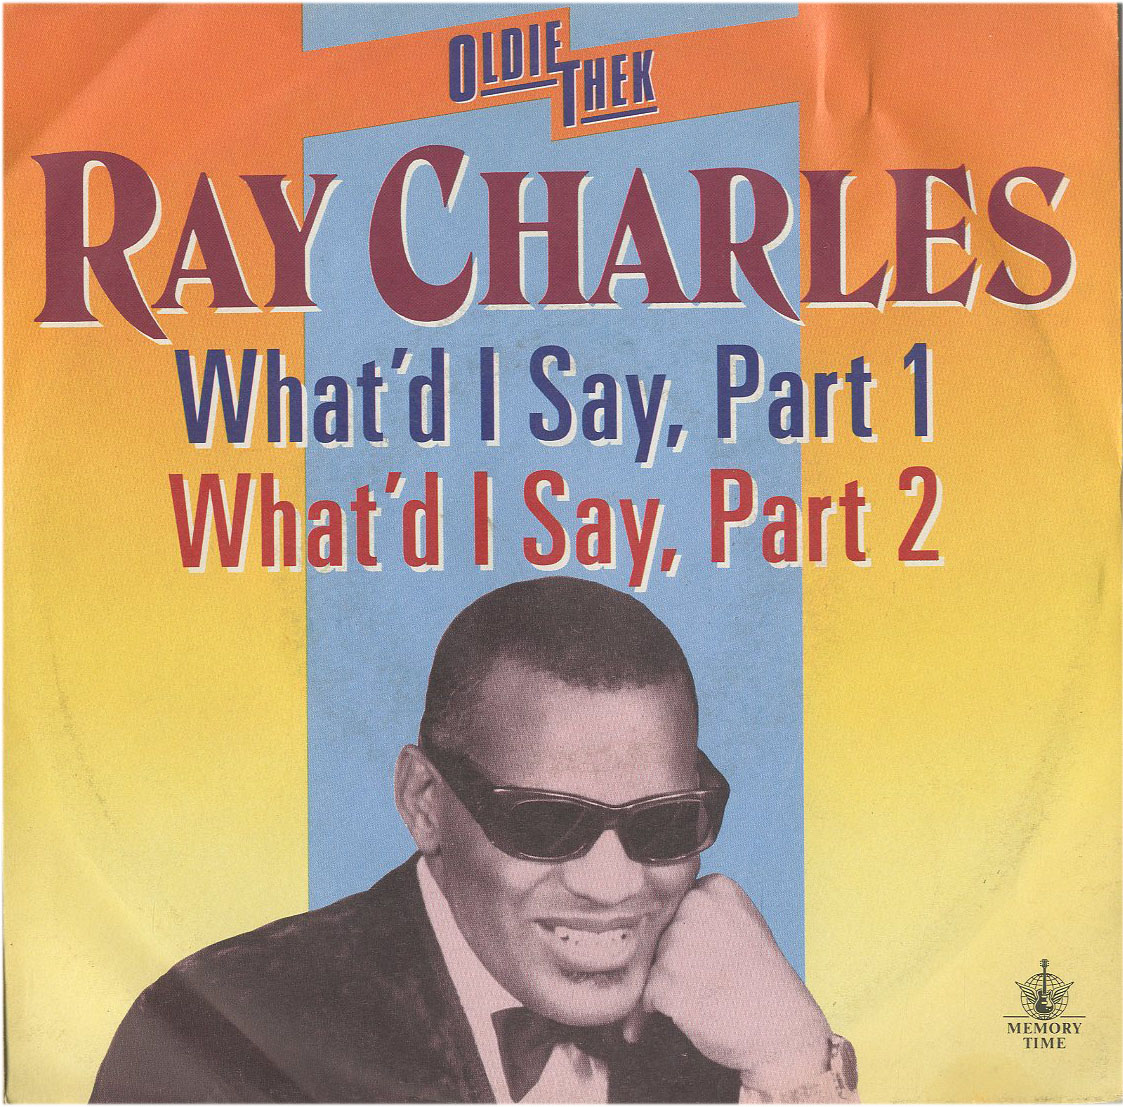 Albumcover Ray Charles - What d I Say Part 1 und Part 2 (OldieThek)